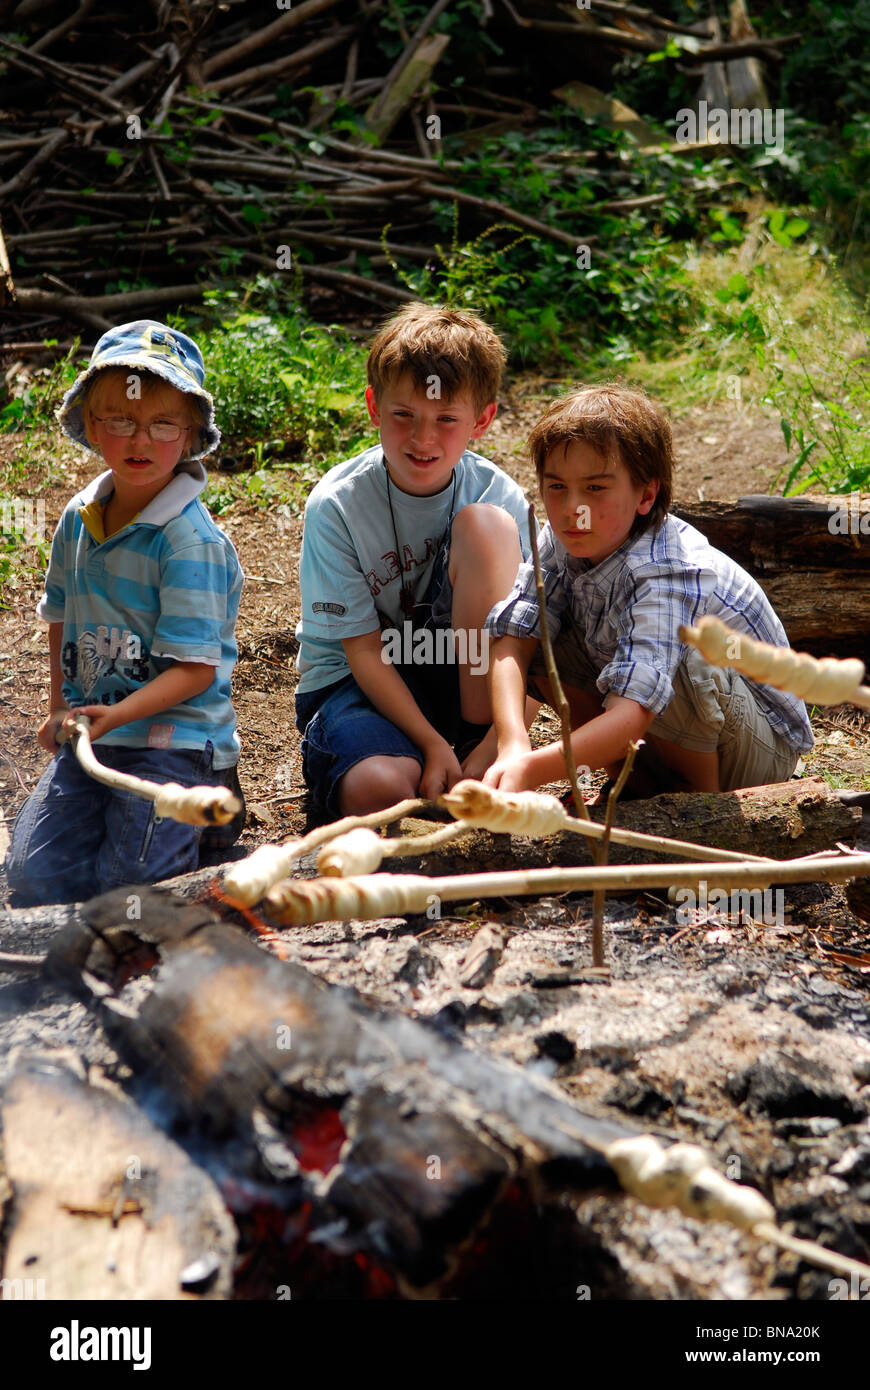 Youngsters baking 'dampers' (dough baked on open fire to make bread) at a scouts celebration day, Haslemere, Surrey, UK. Stock Photo